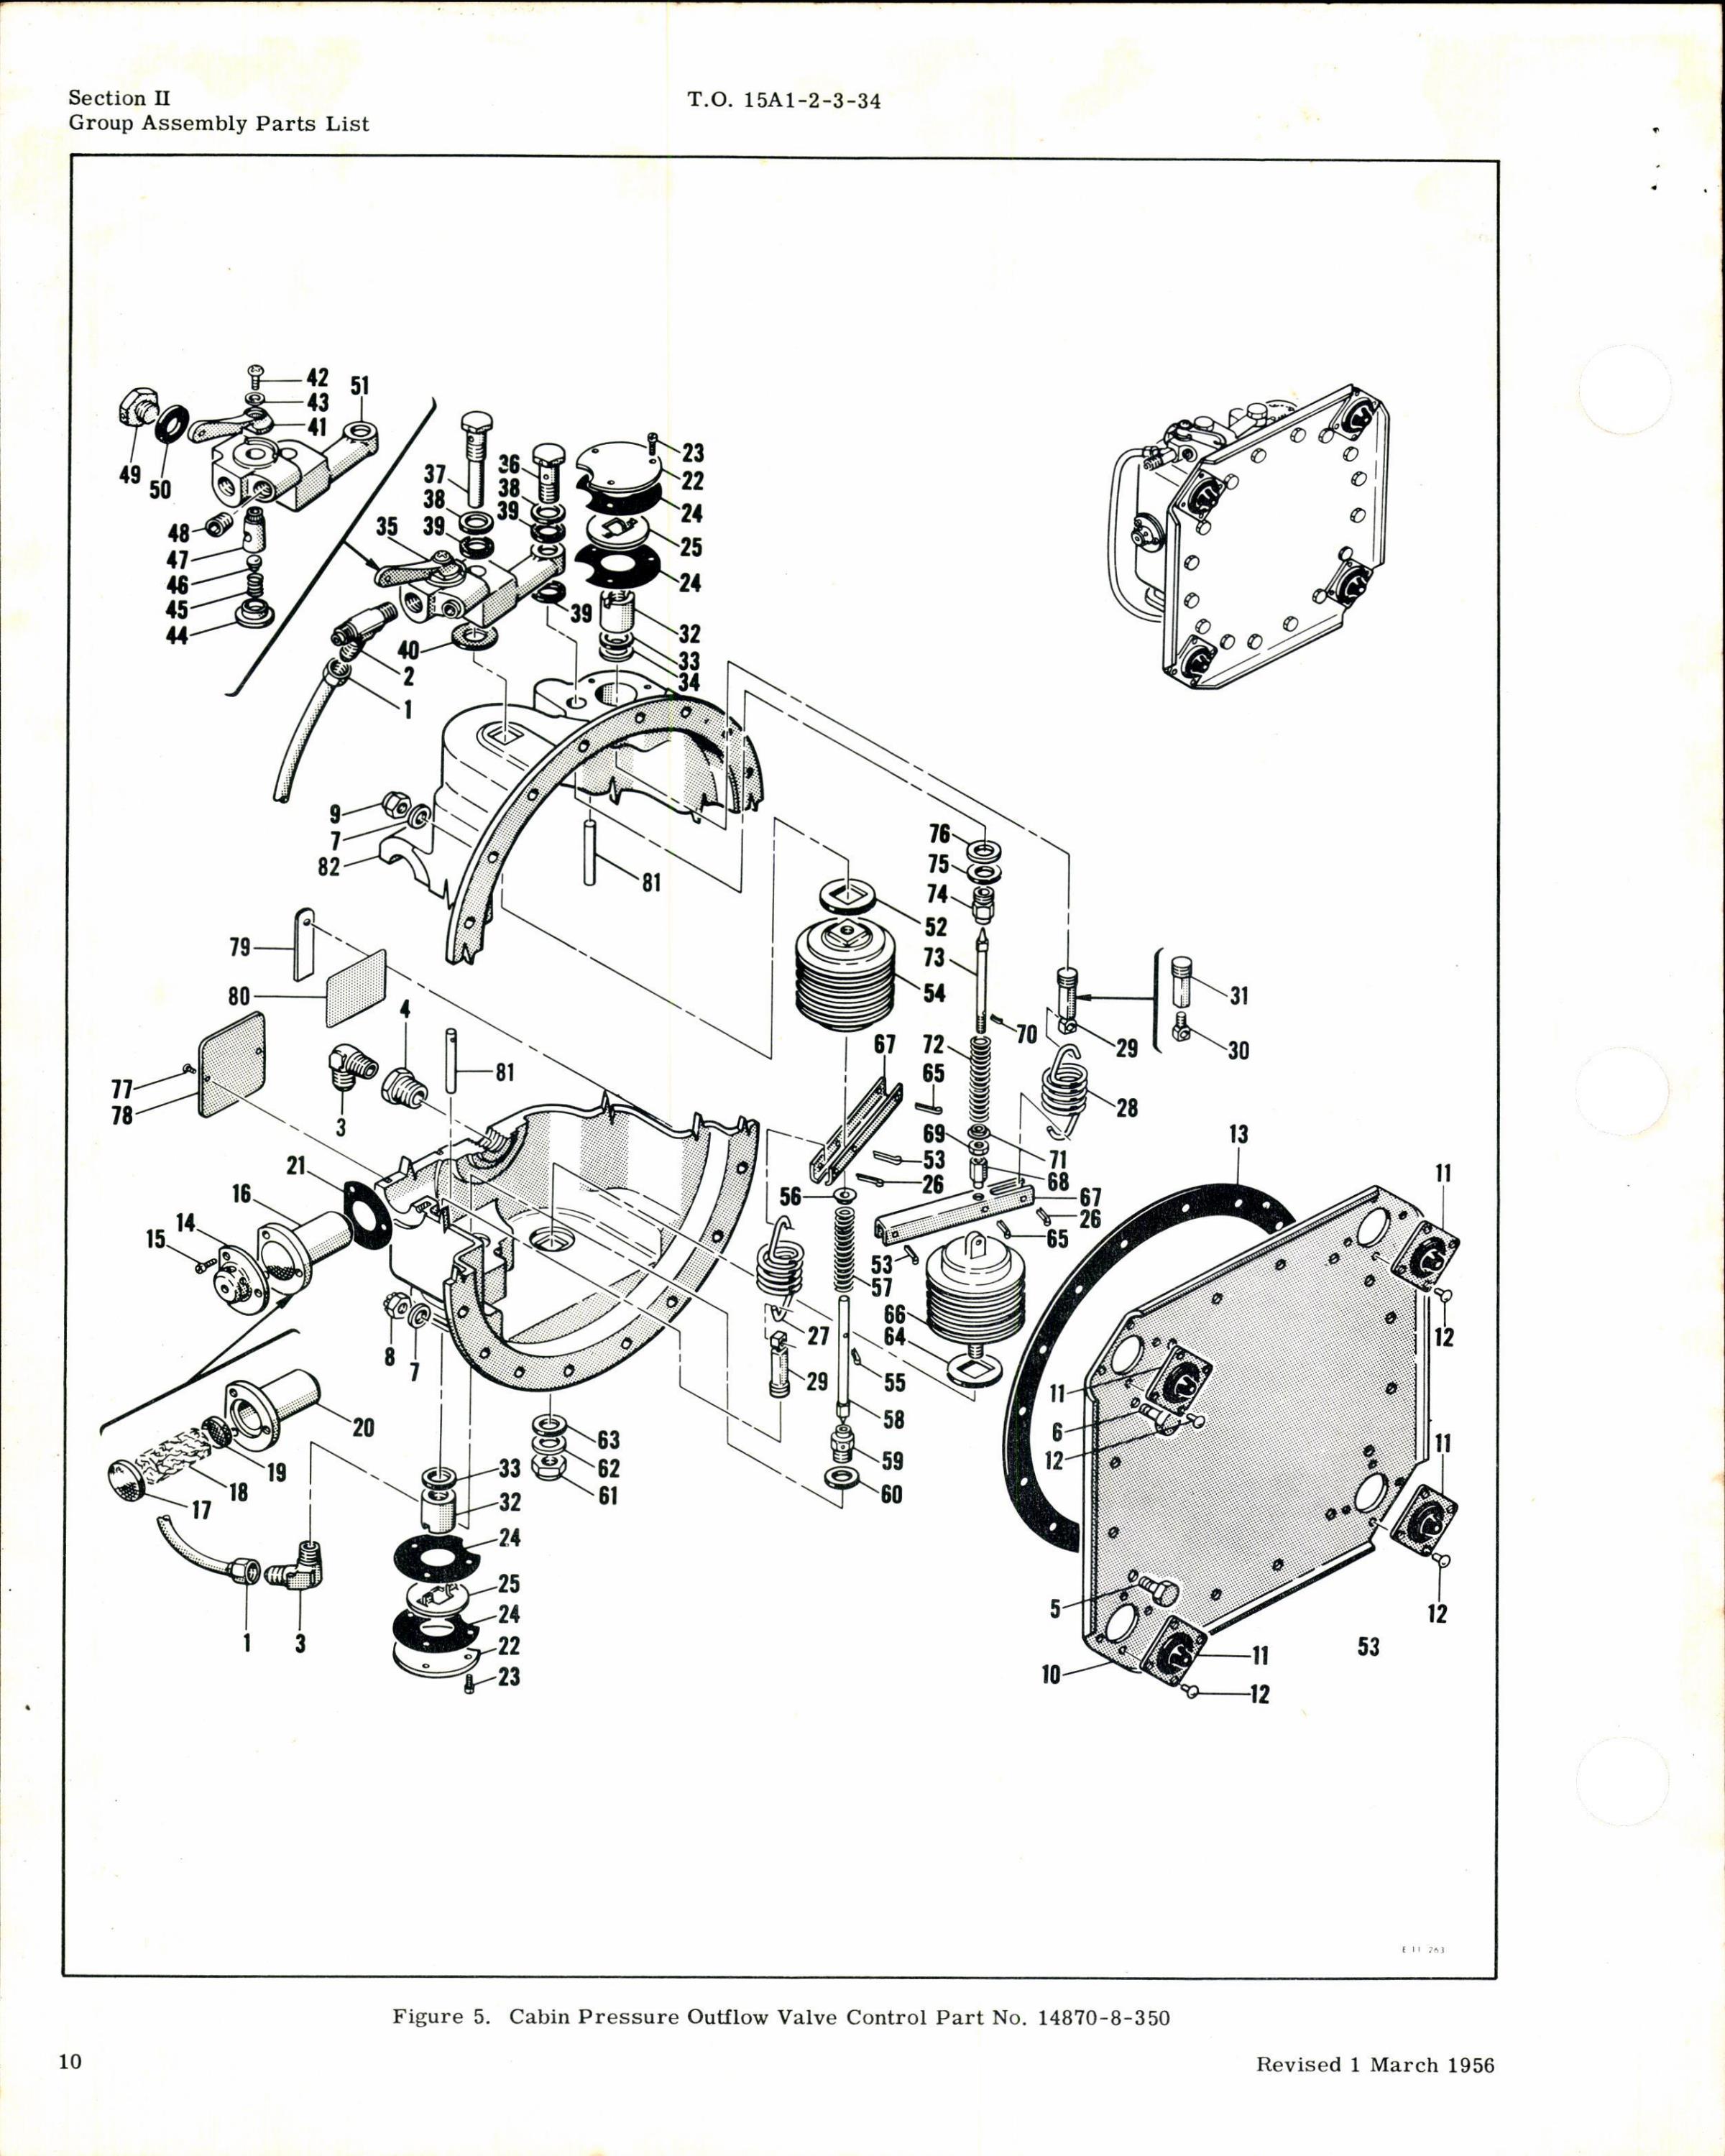 Sample page 4 from AirCorps Library document: Illustrated Parts Breakdown for Airesearch Cabin Pressure Regulators